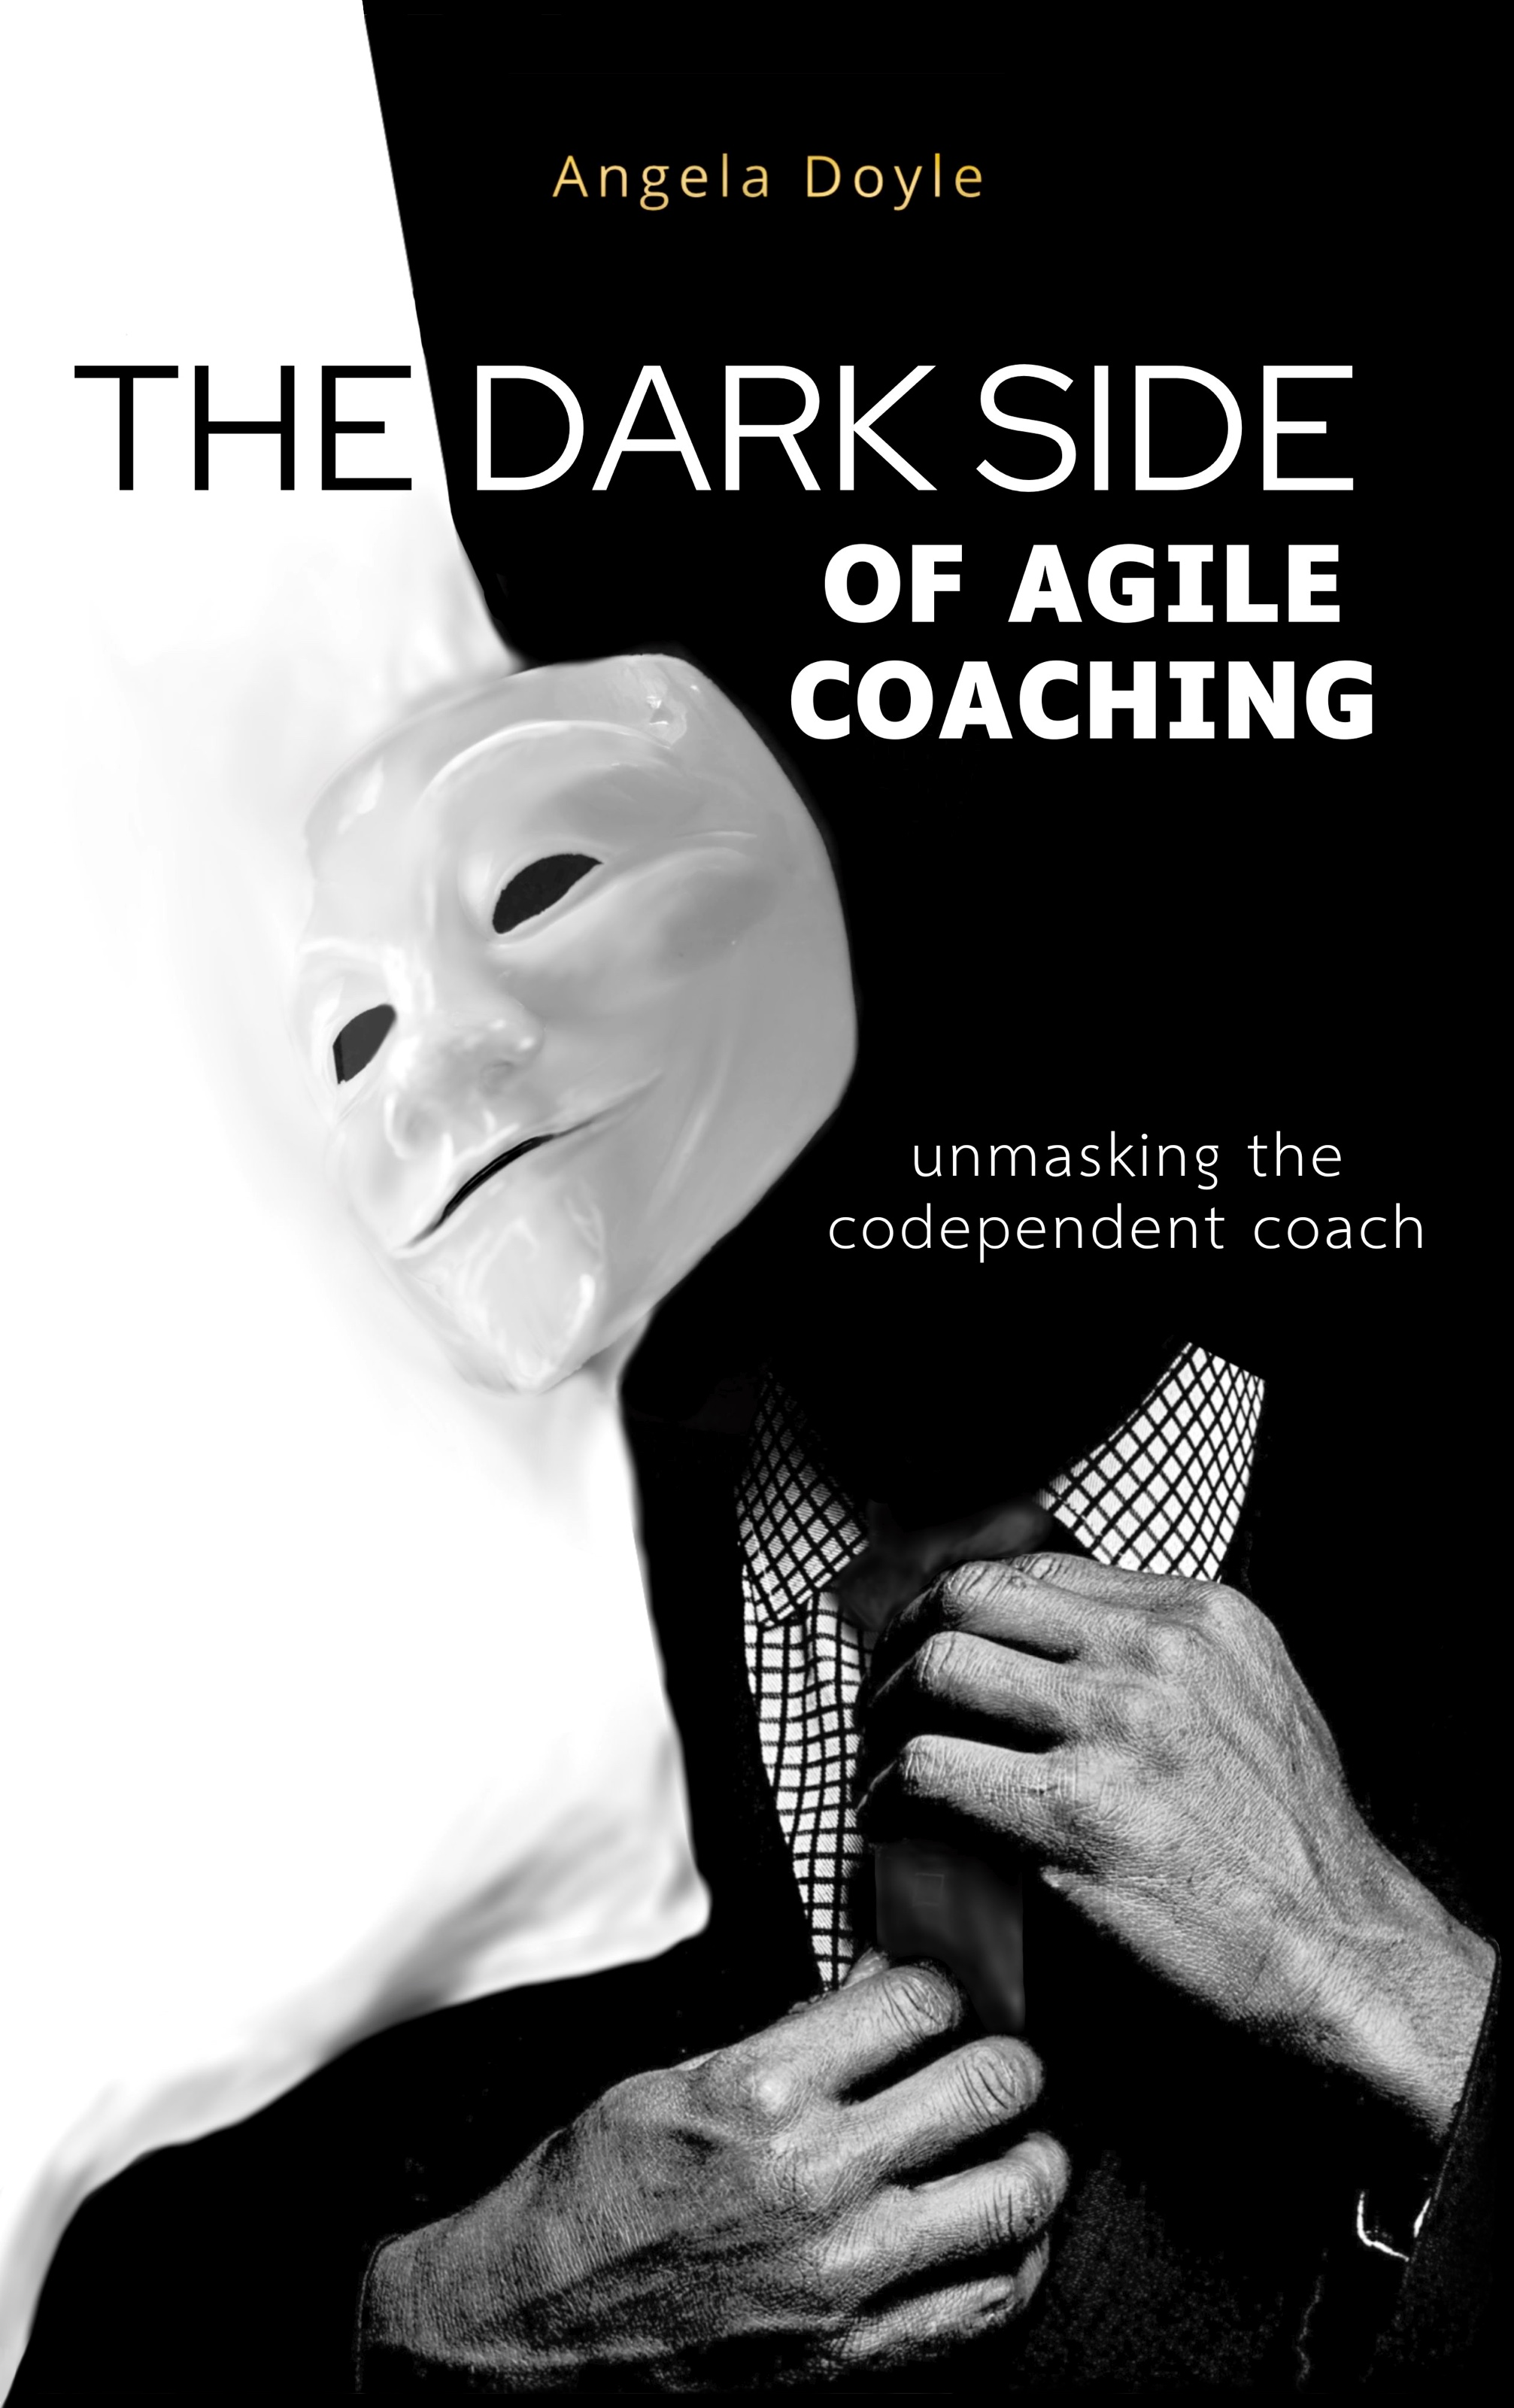 The Dark Side of Agile Coaching: Unmasking the Codependent Coach by Angela Doyle